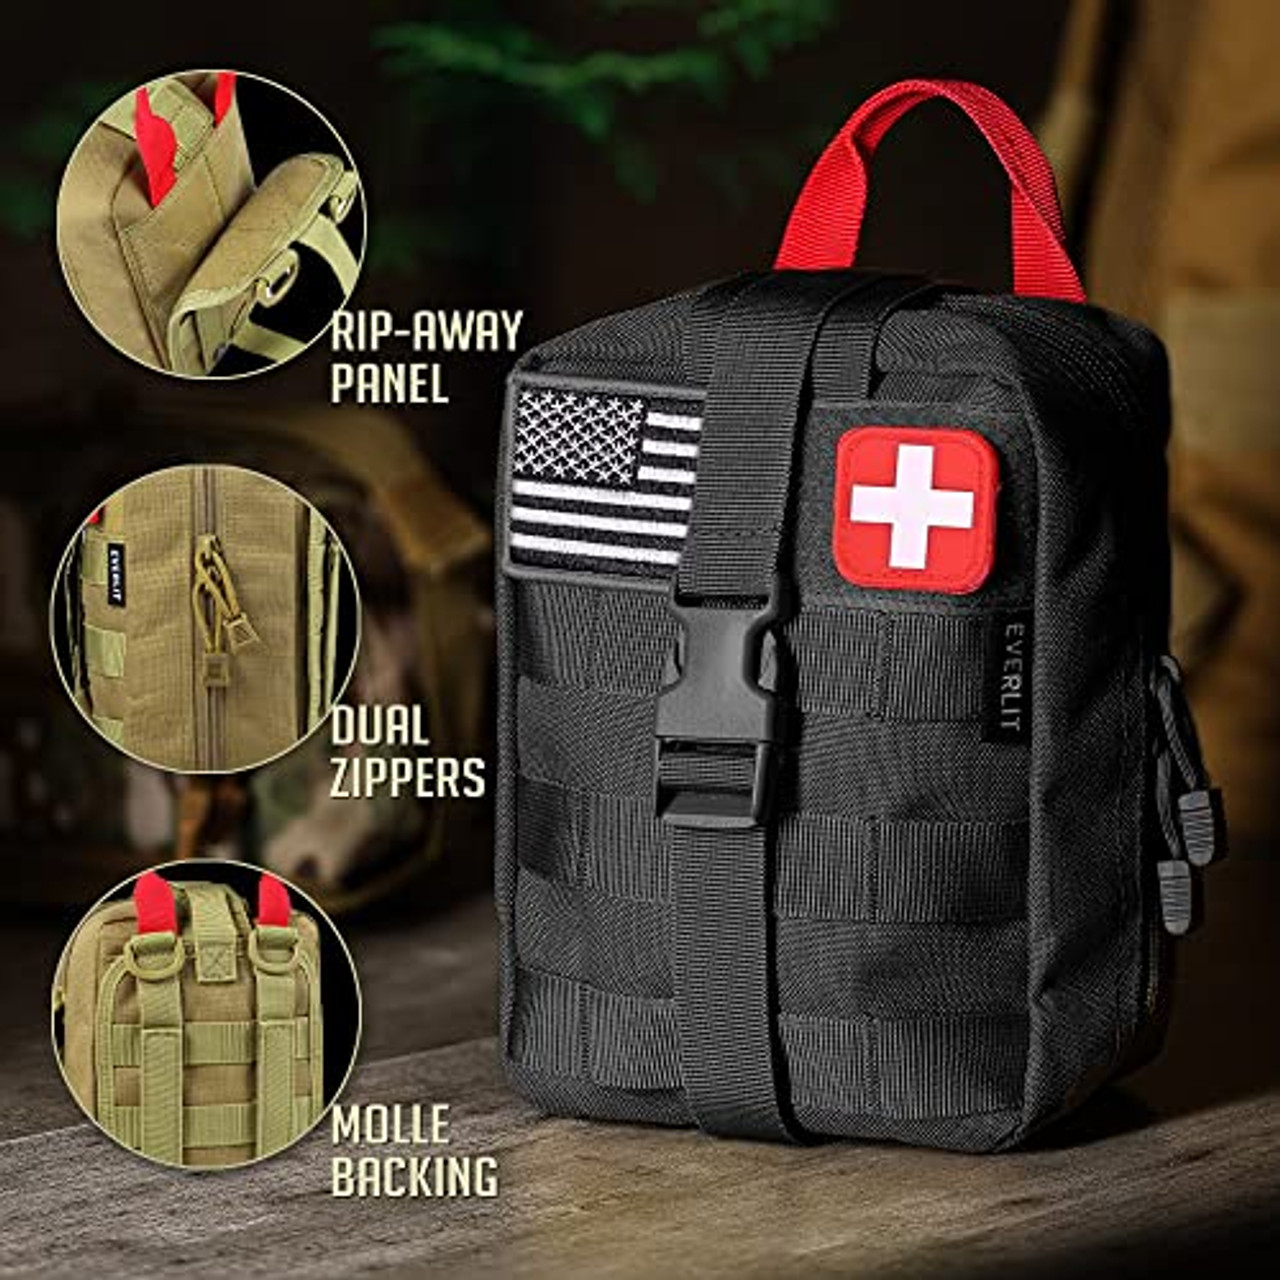 EVERLIT EVERLIT 250 Pieces Survival First Aid Kit IFAK EMT Molle Pouch Survival  Kit Outdoor Gear Emergency Kits Trauma Bag for Camping Boat Hunting Hiking  Home Car Earthquake and Adventures Outdoors